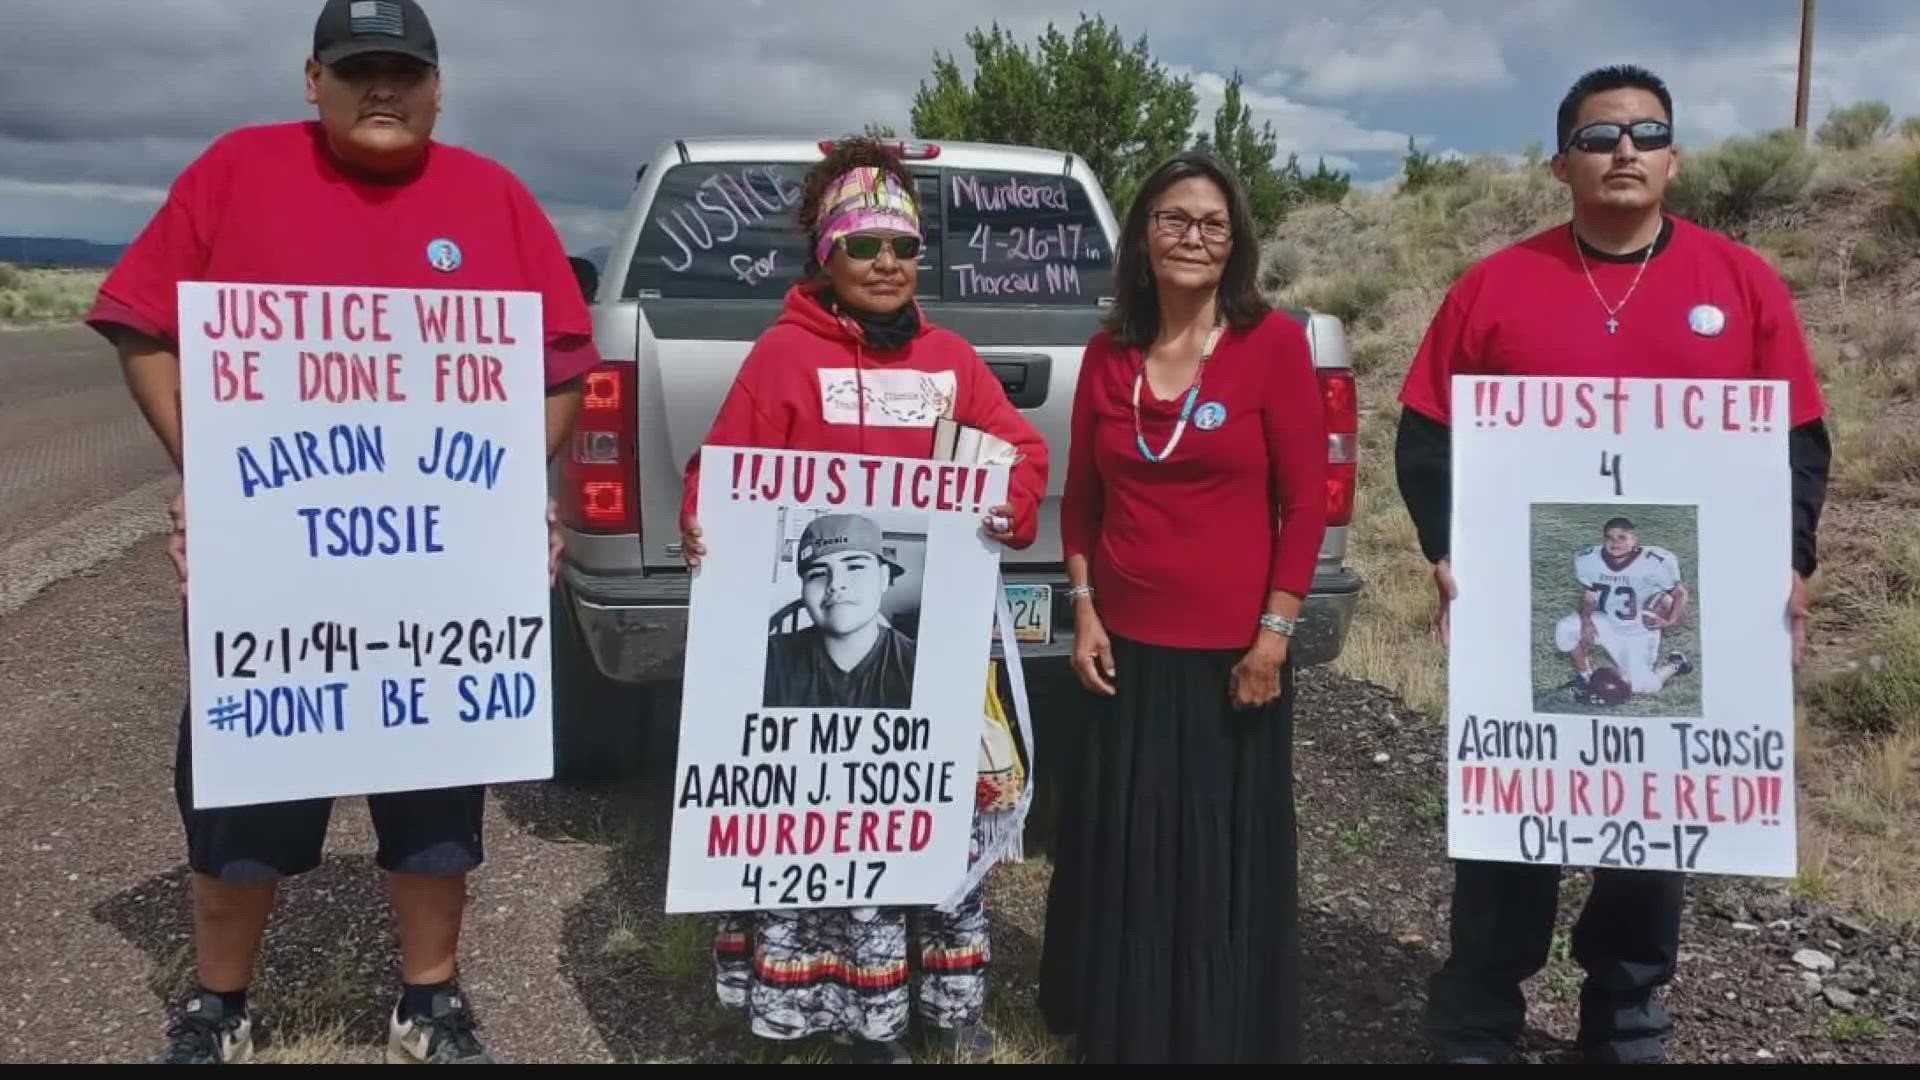 A woman is walking from the Navajo Nation to D.C. She's on a mission to get answers regarding her aunt's disappearance and to push the investigation forward.